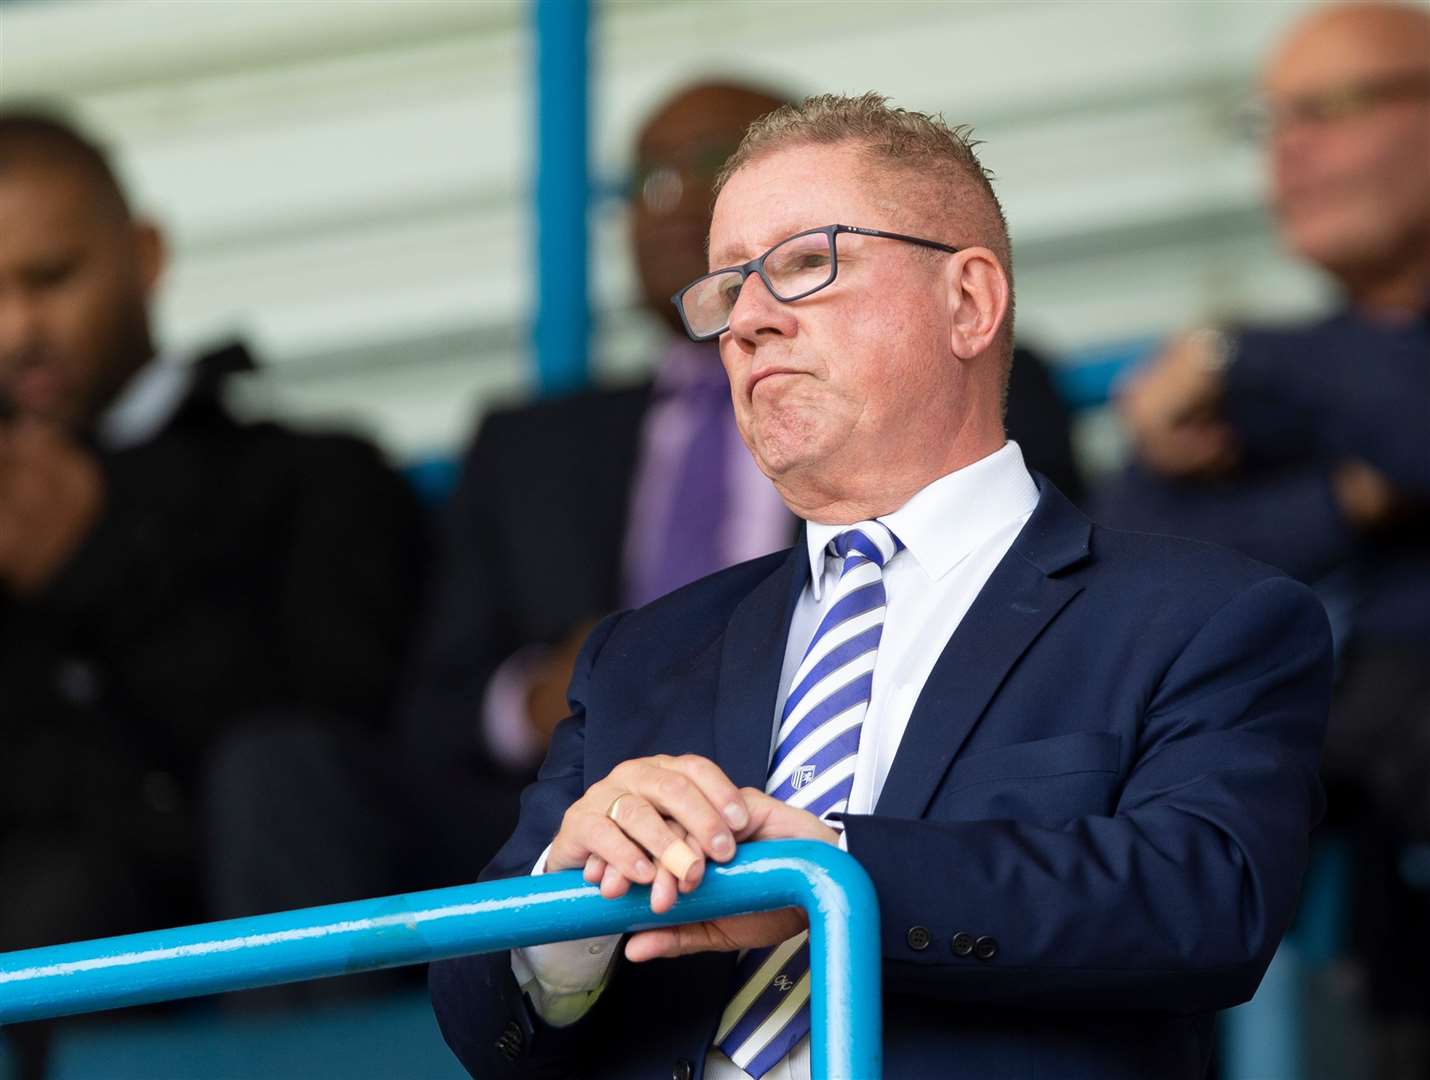 Gillingham chairman Paul Scally believes Premier League clubs could help struggling teams in the EFL